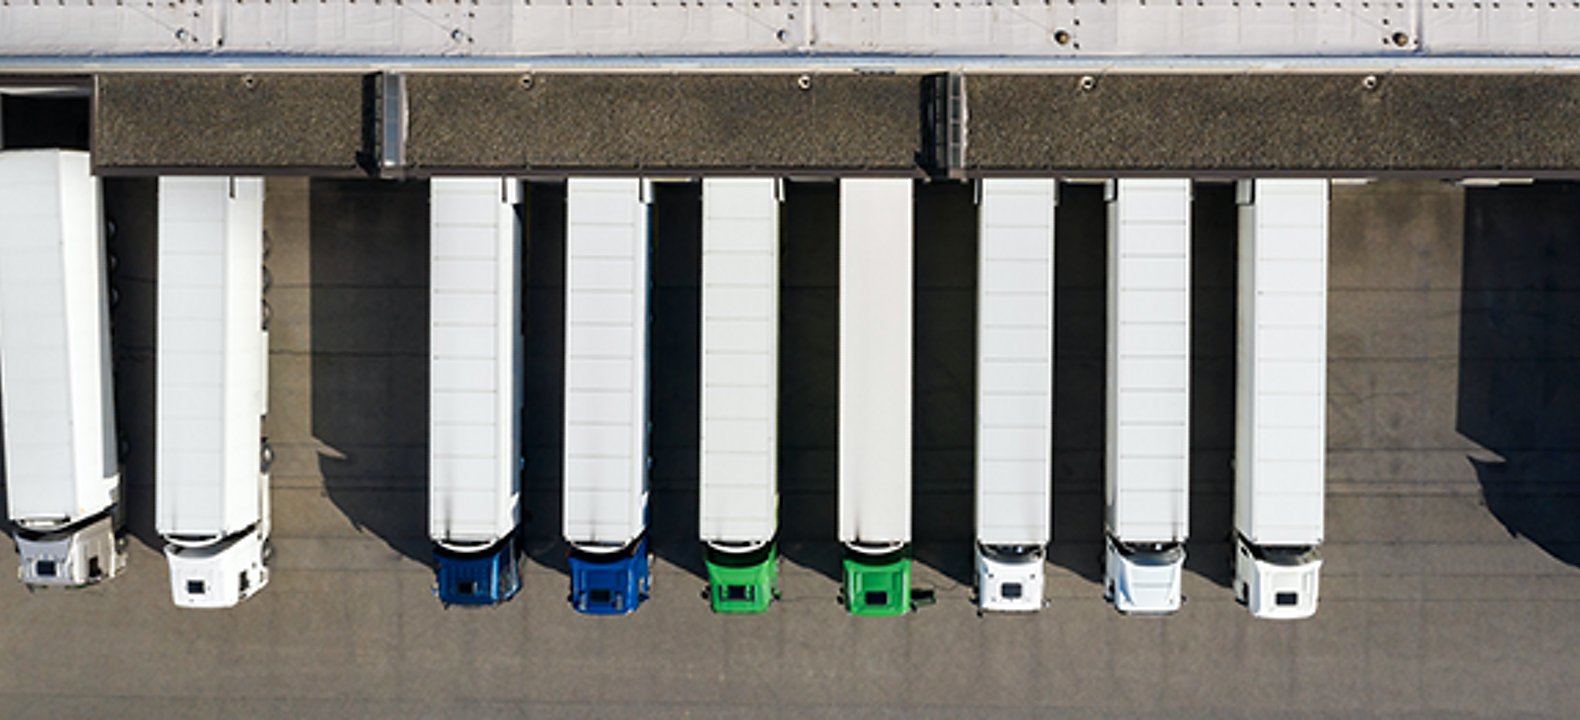 Ariel view of parked 18 wheelers at loading dock